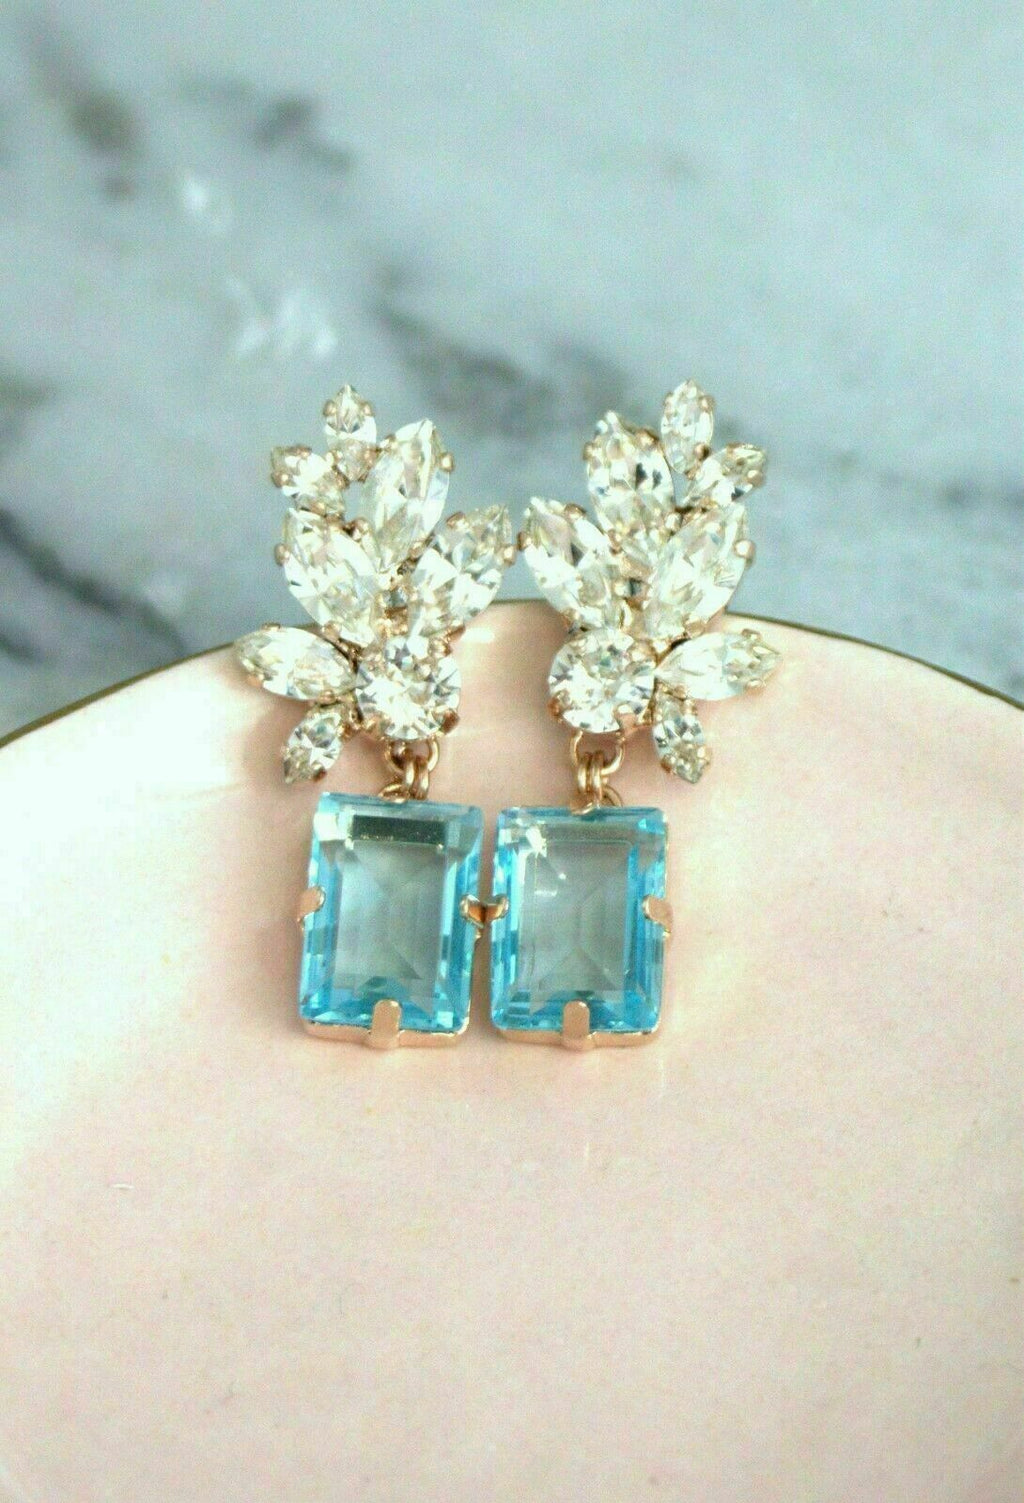 3 CT Emerald Cut Blue Topaz Drop/Dangle Earrings Jewelry Gift Her 925 Sterling Sliver